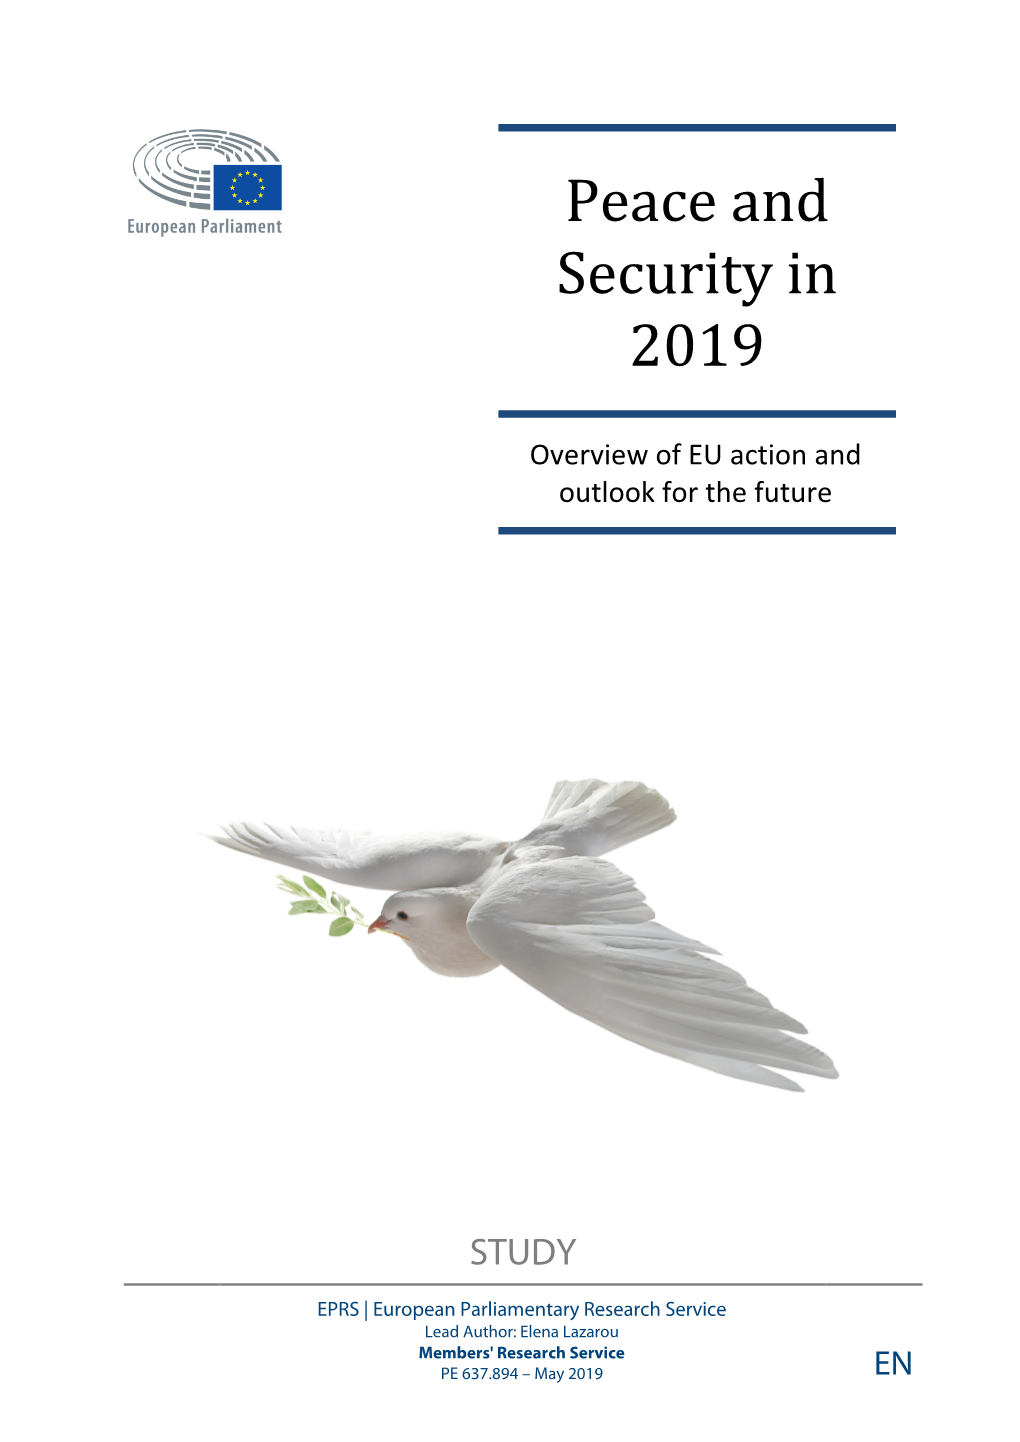 Peace and Security in 2019. Overview of EU Action and Outlook for the Future